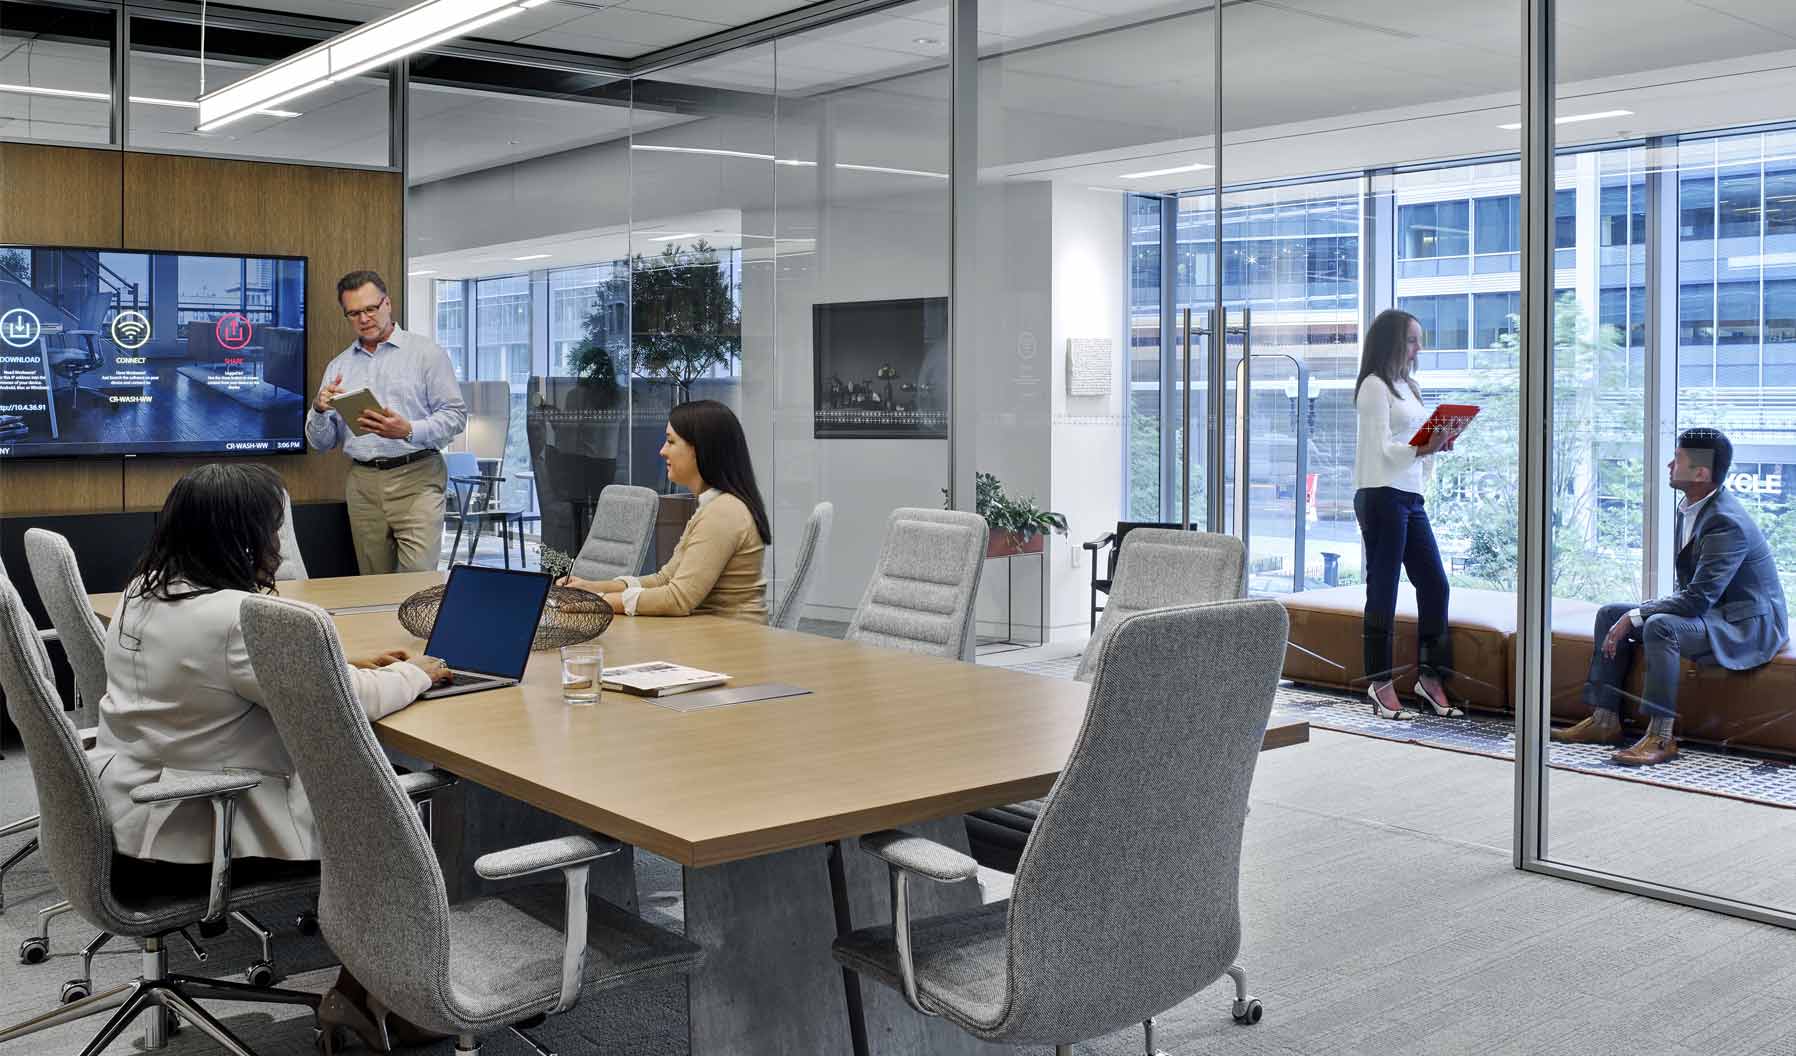 This meeting space supports collaboration as well as a warm and inviting culture within the workplace. The wood accent walls, shelving, and proximity to a lounge posture setting contribute additional layers beyond the great natural light this space offers.